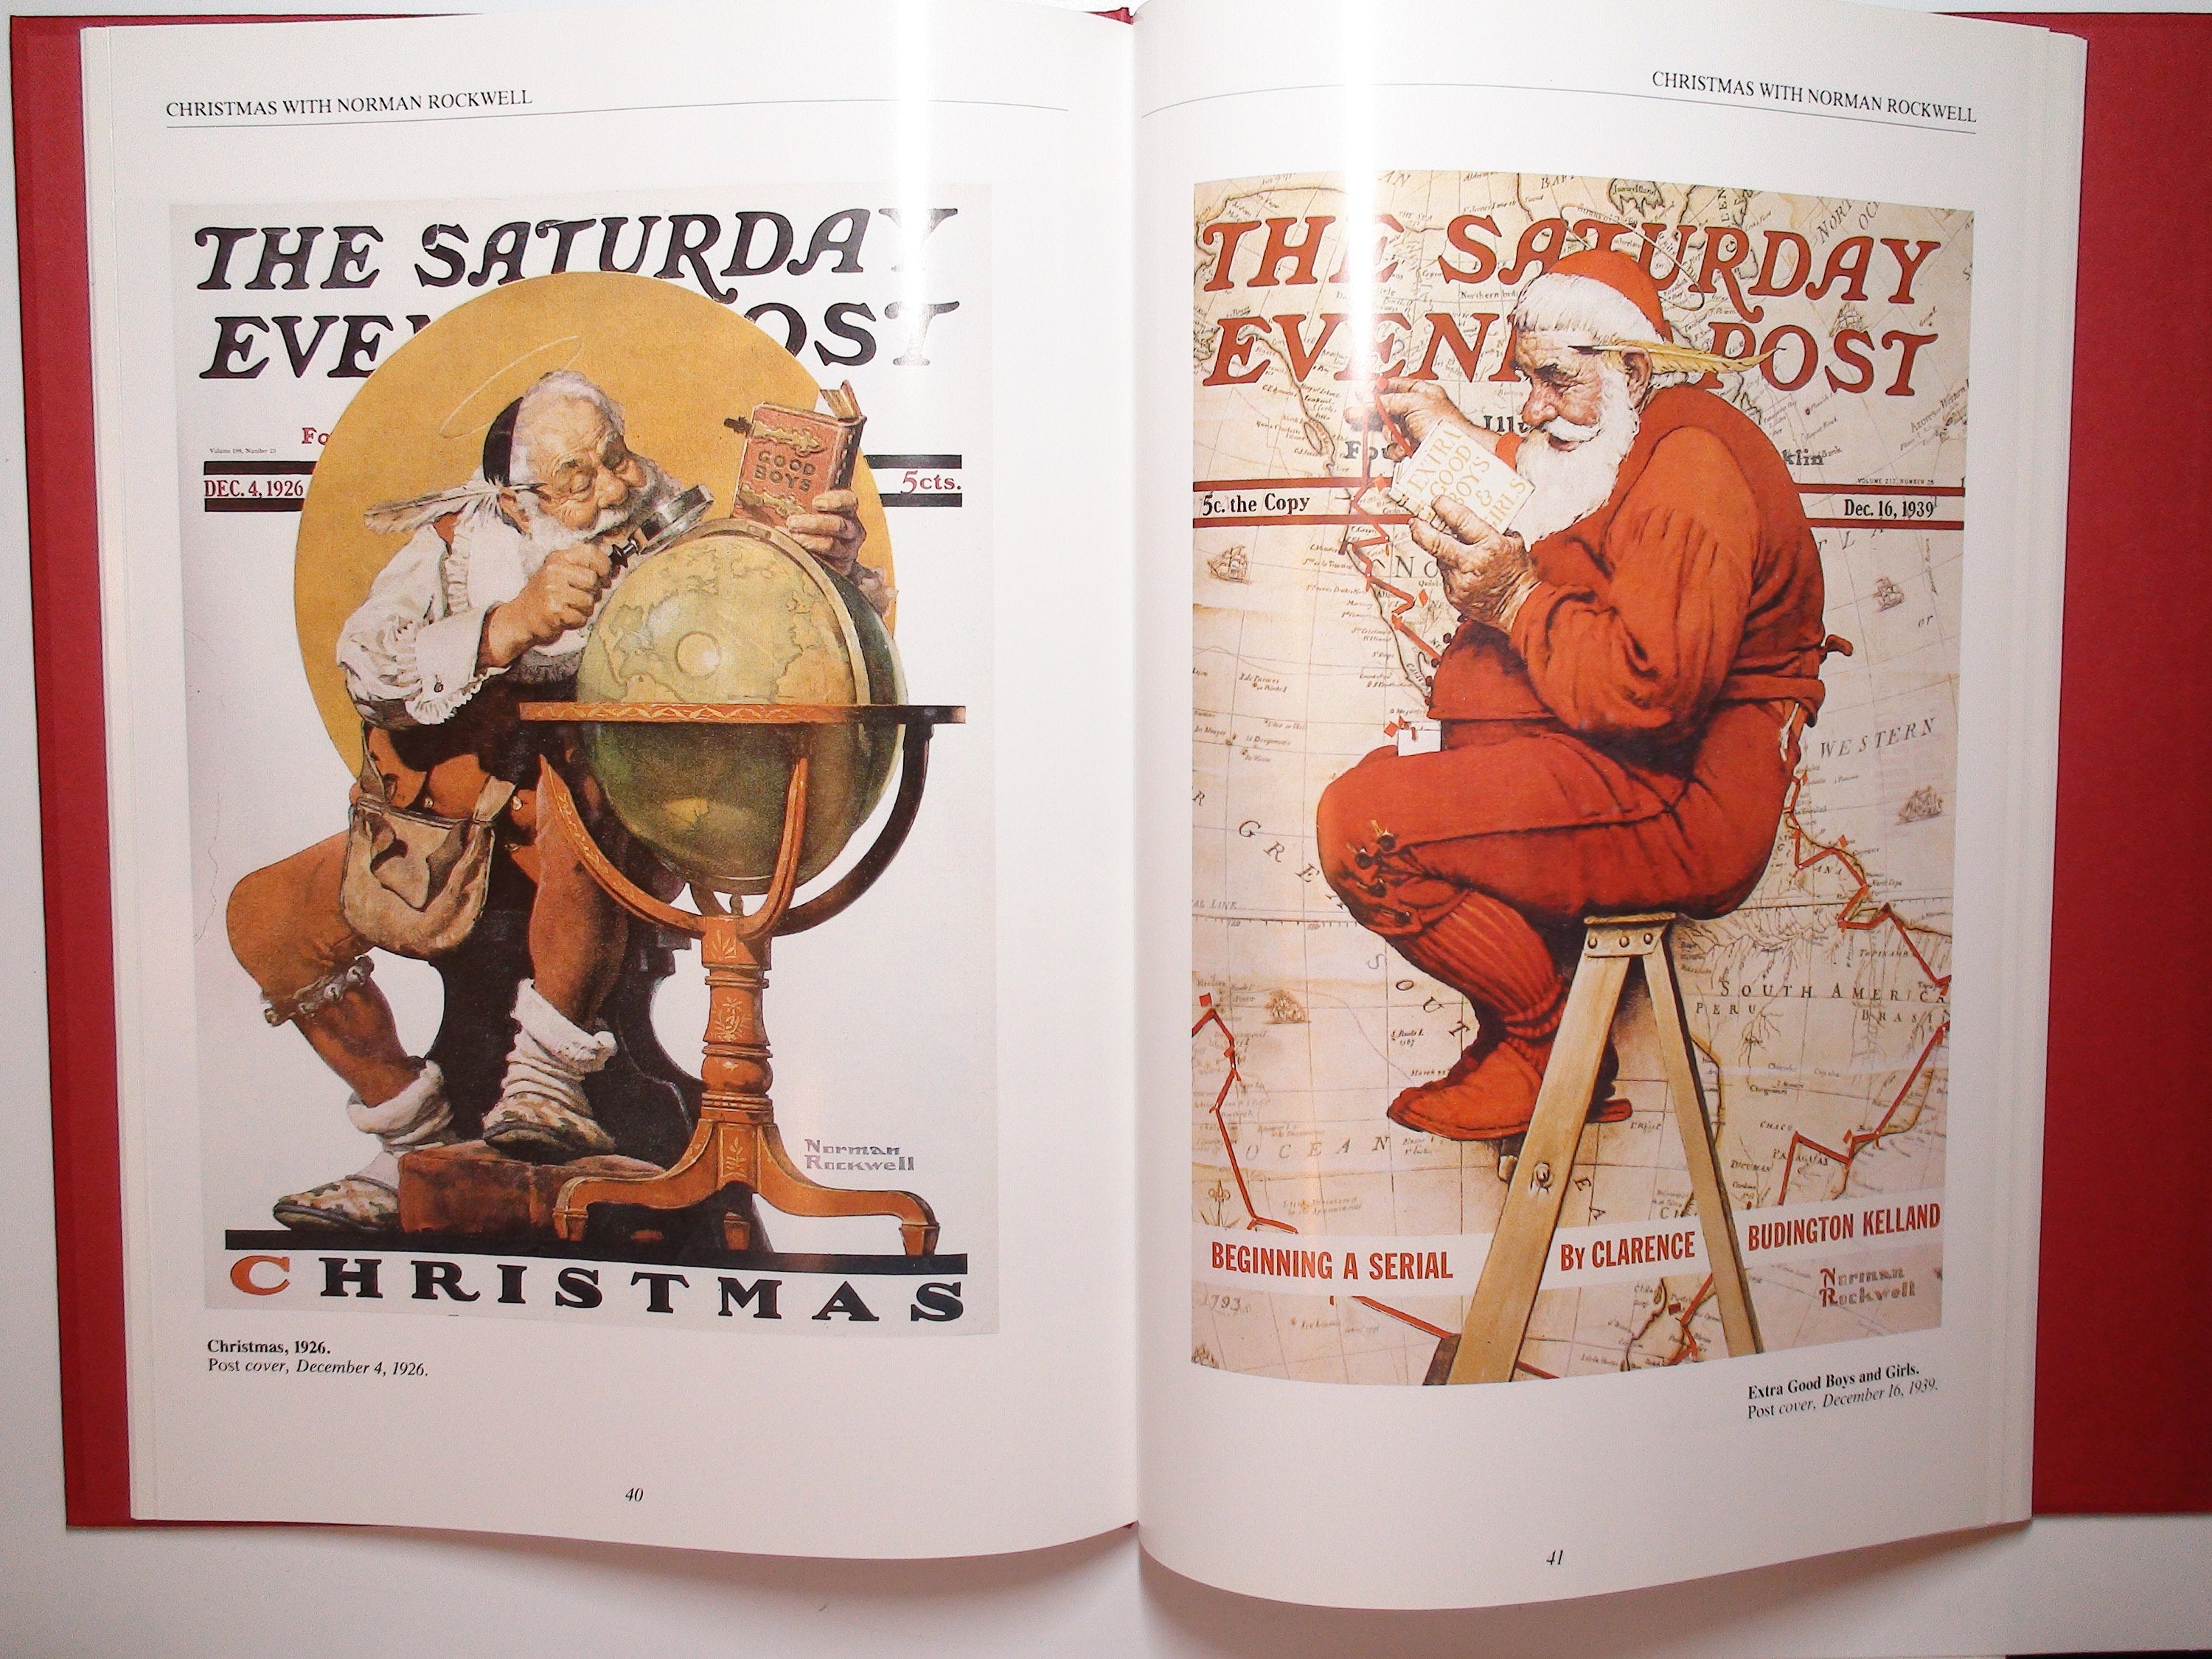 Christmas with Norman Rockwell, by John Kirk, Illustrated in Color, 1990